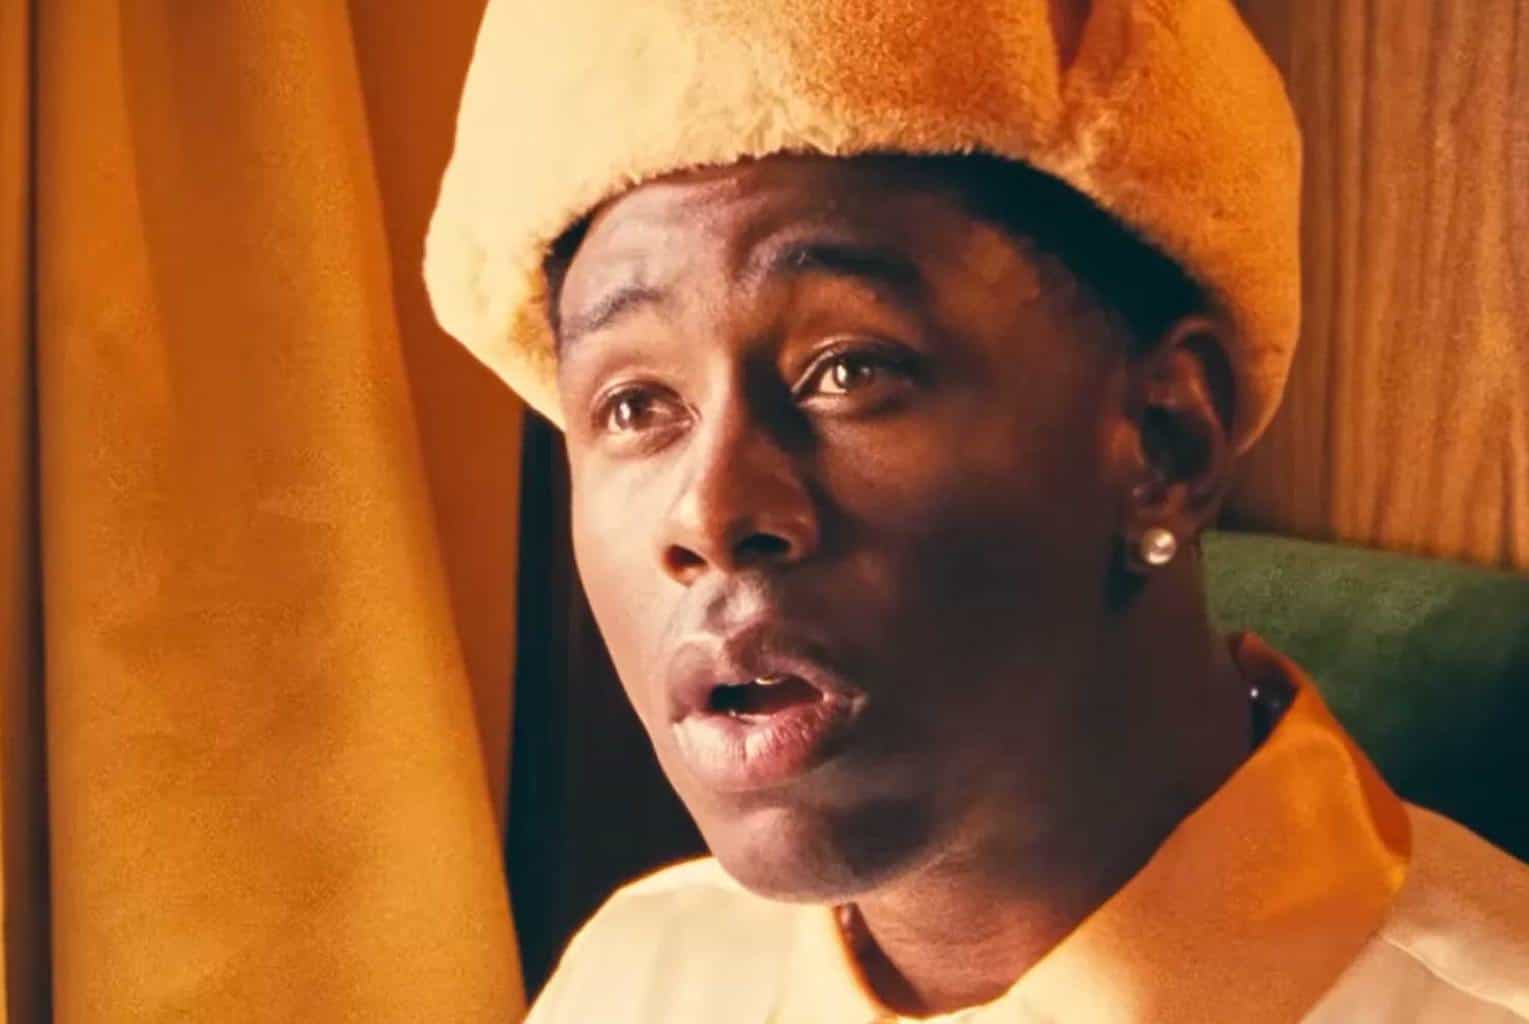 Lumberjack' Is a Reminder Tyler, the Creator Can Rap His Ass Off